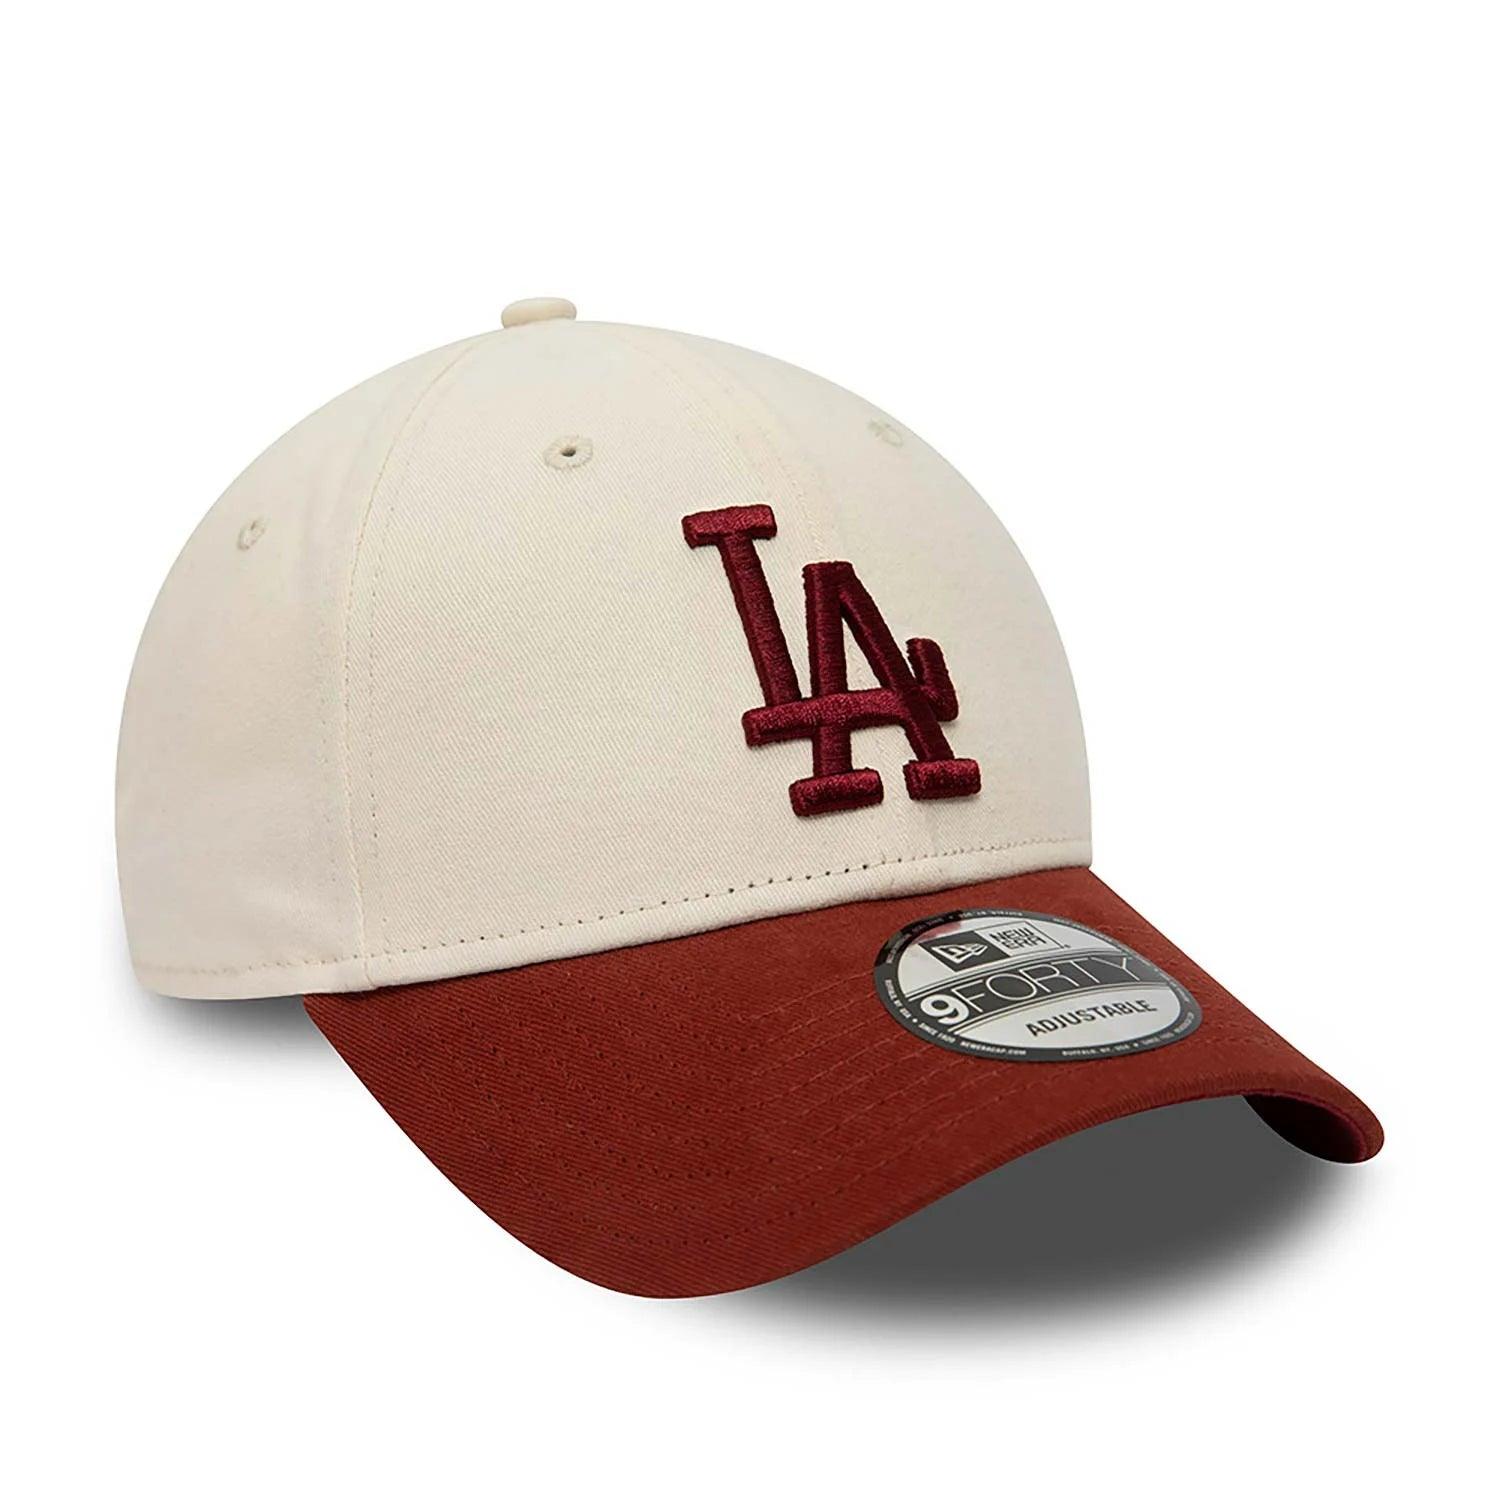 NEW ERA 9FORTY MLB LOS ANGELES DODGERS TWO TONE CAP